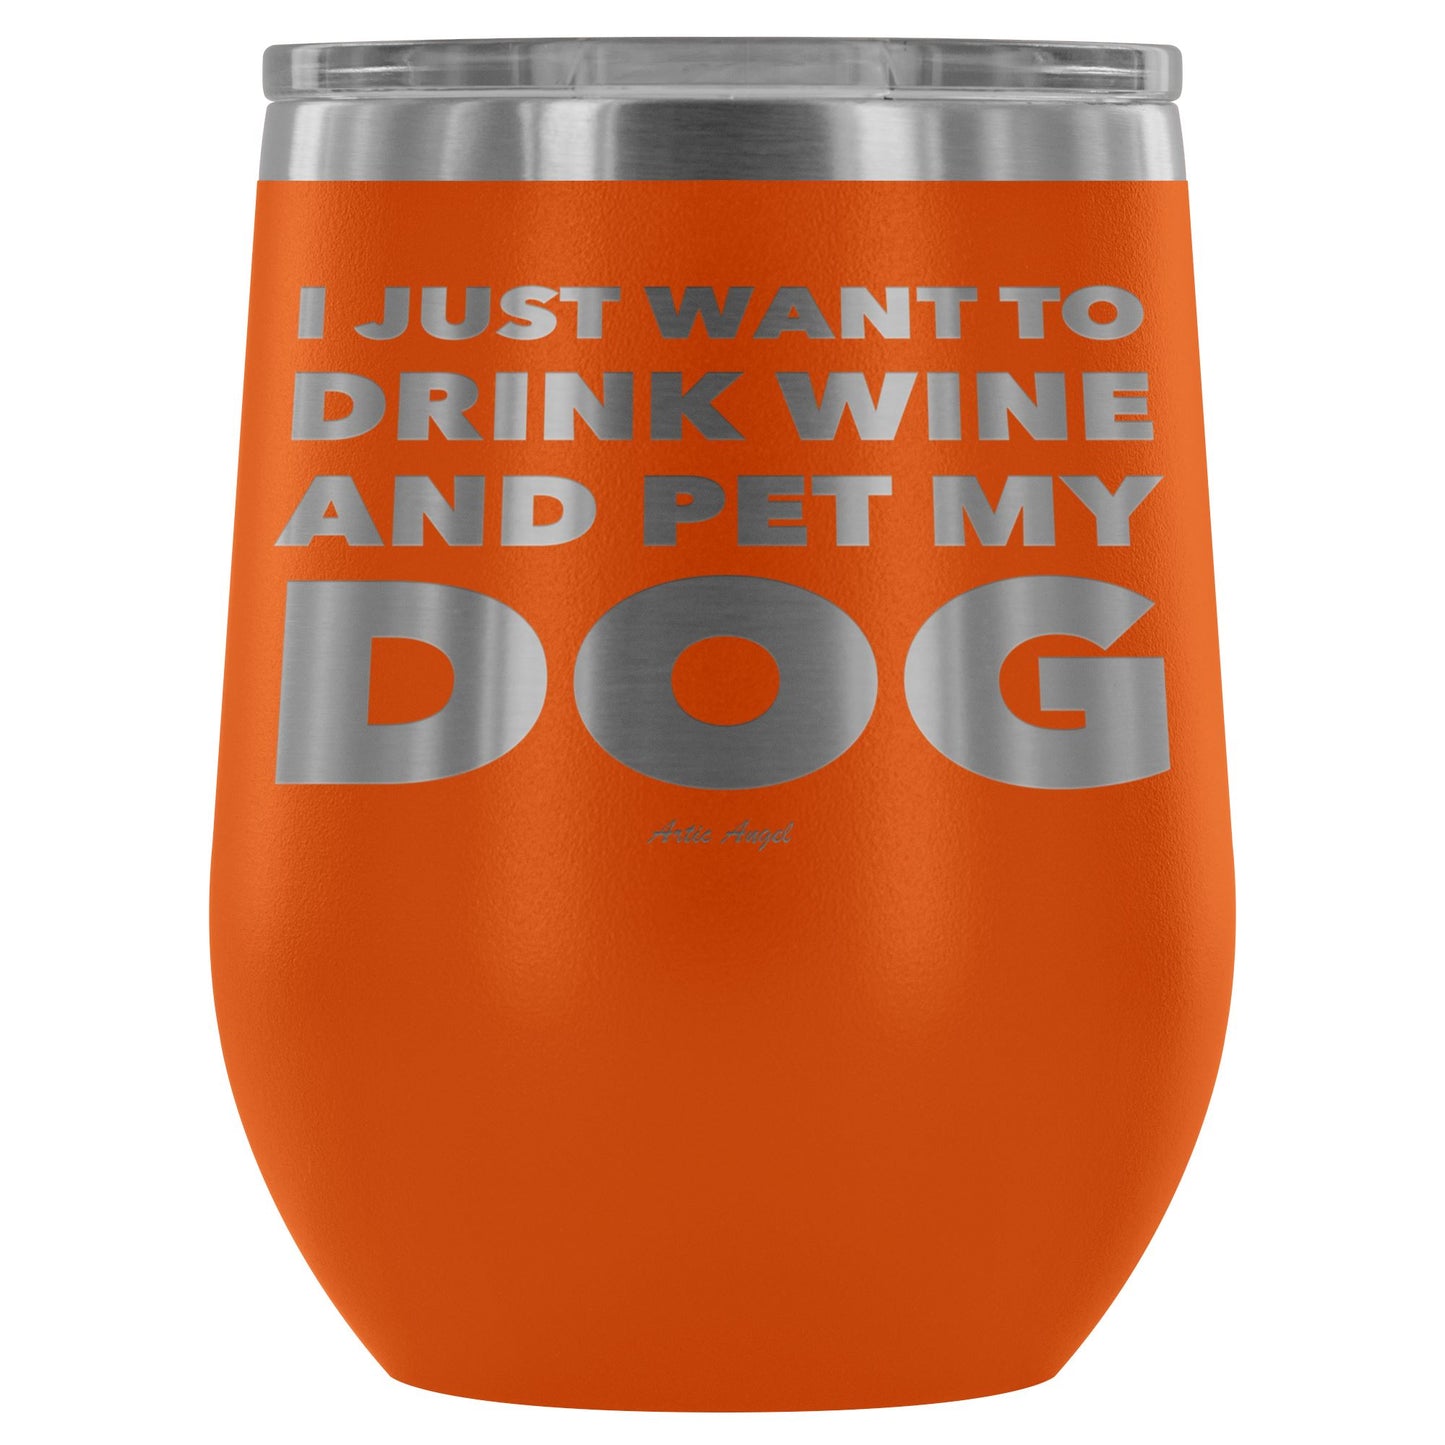 "I Just Want To Drink Wine And Pet My Dog" - Stemless Wine Cup Wine Tumbler Orange 